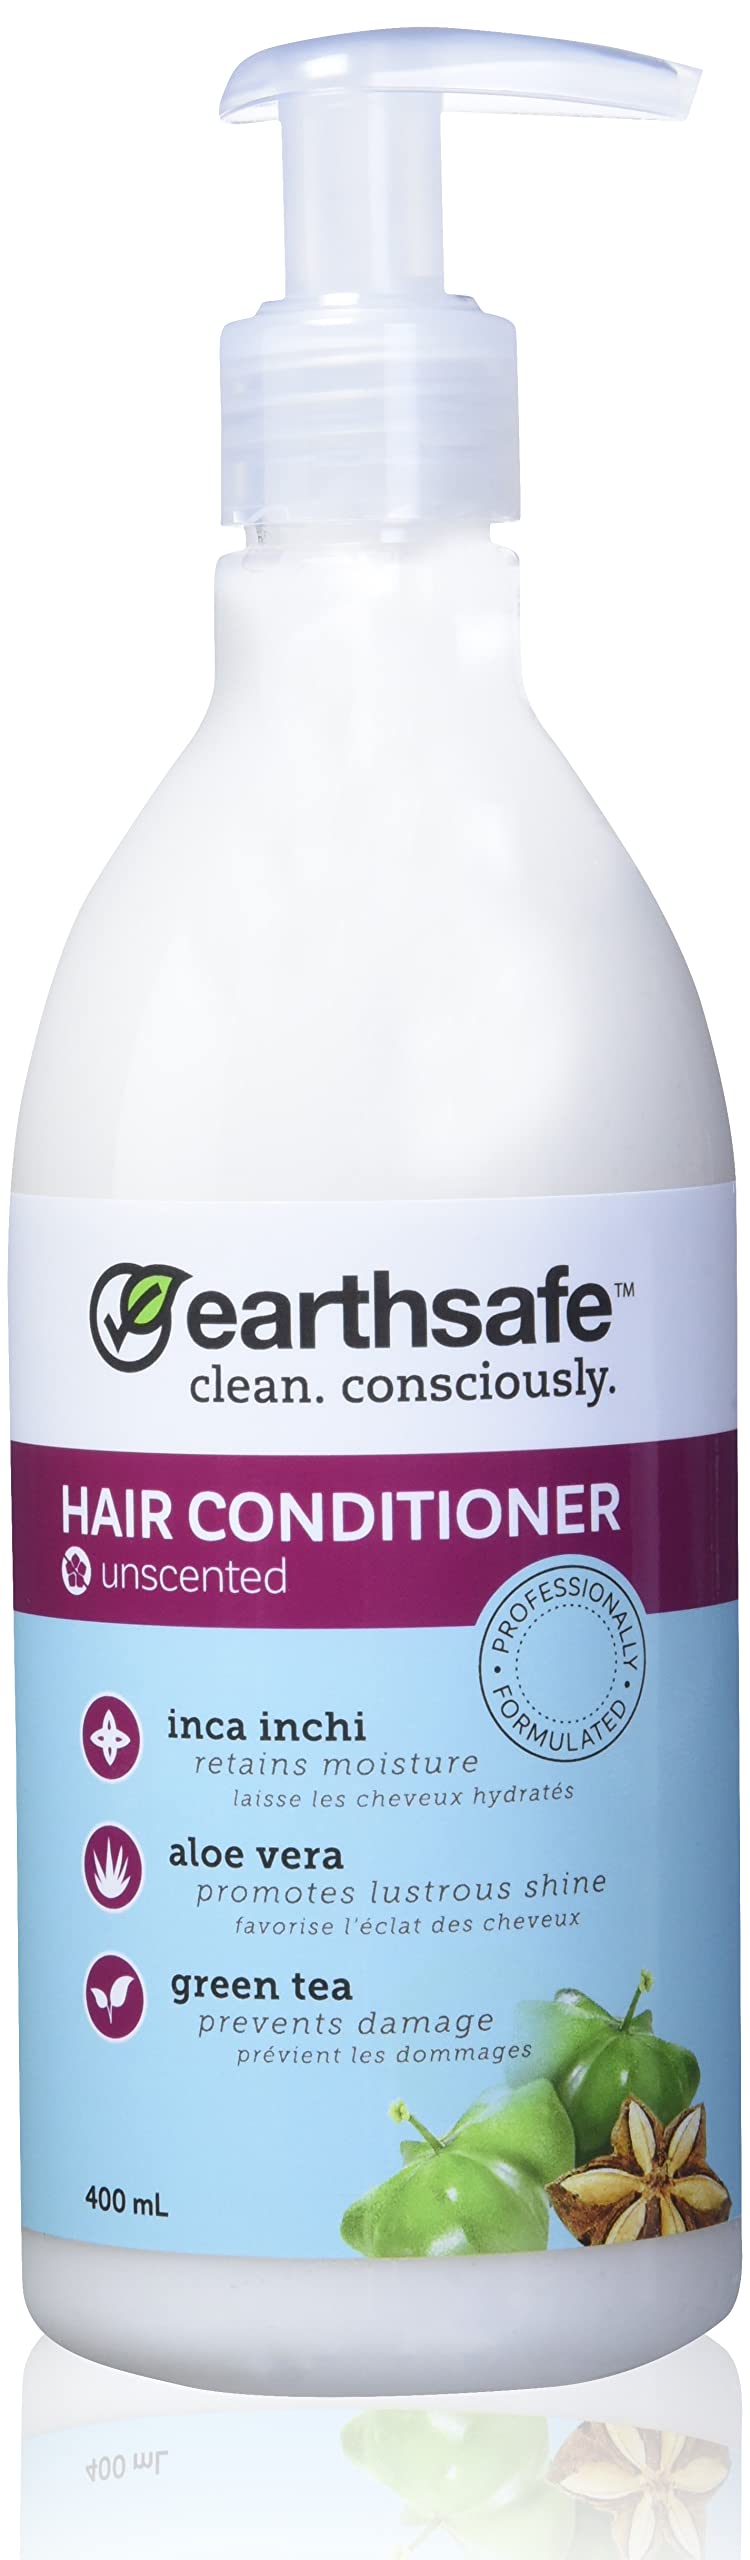 Earthsafe Unscented Hair Conditioner, 400 ml (Pack of 1)